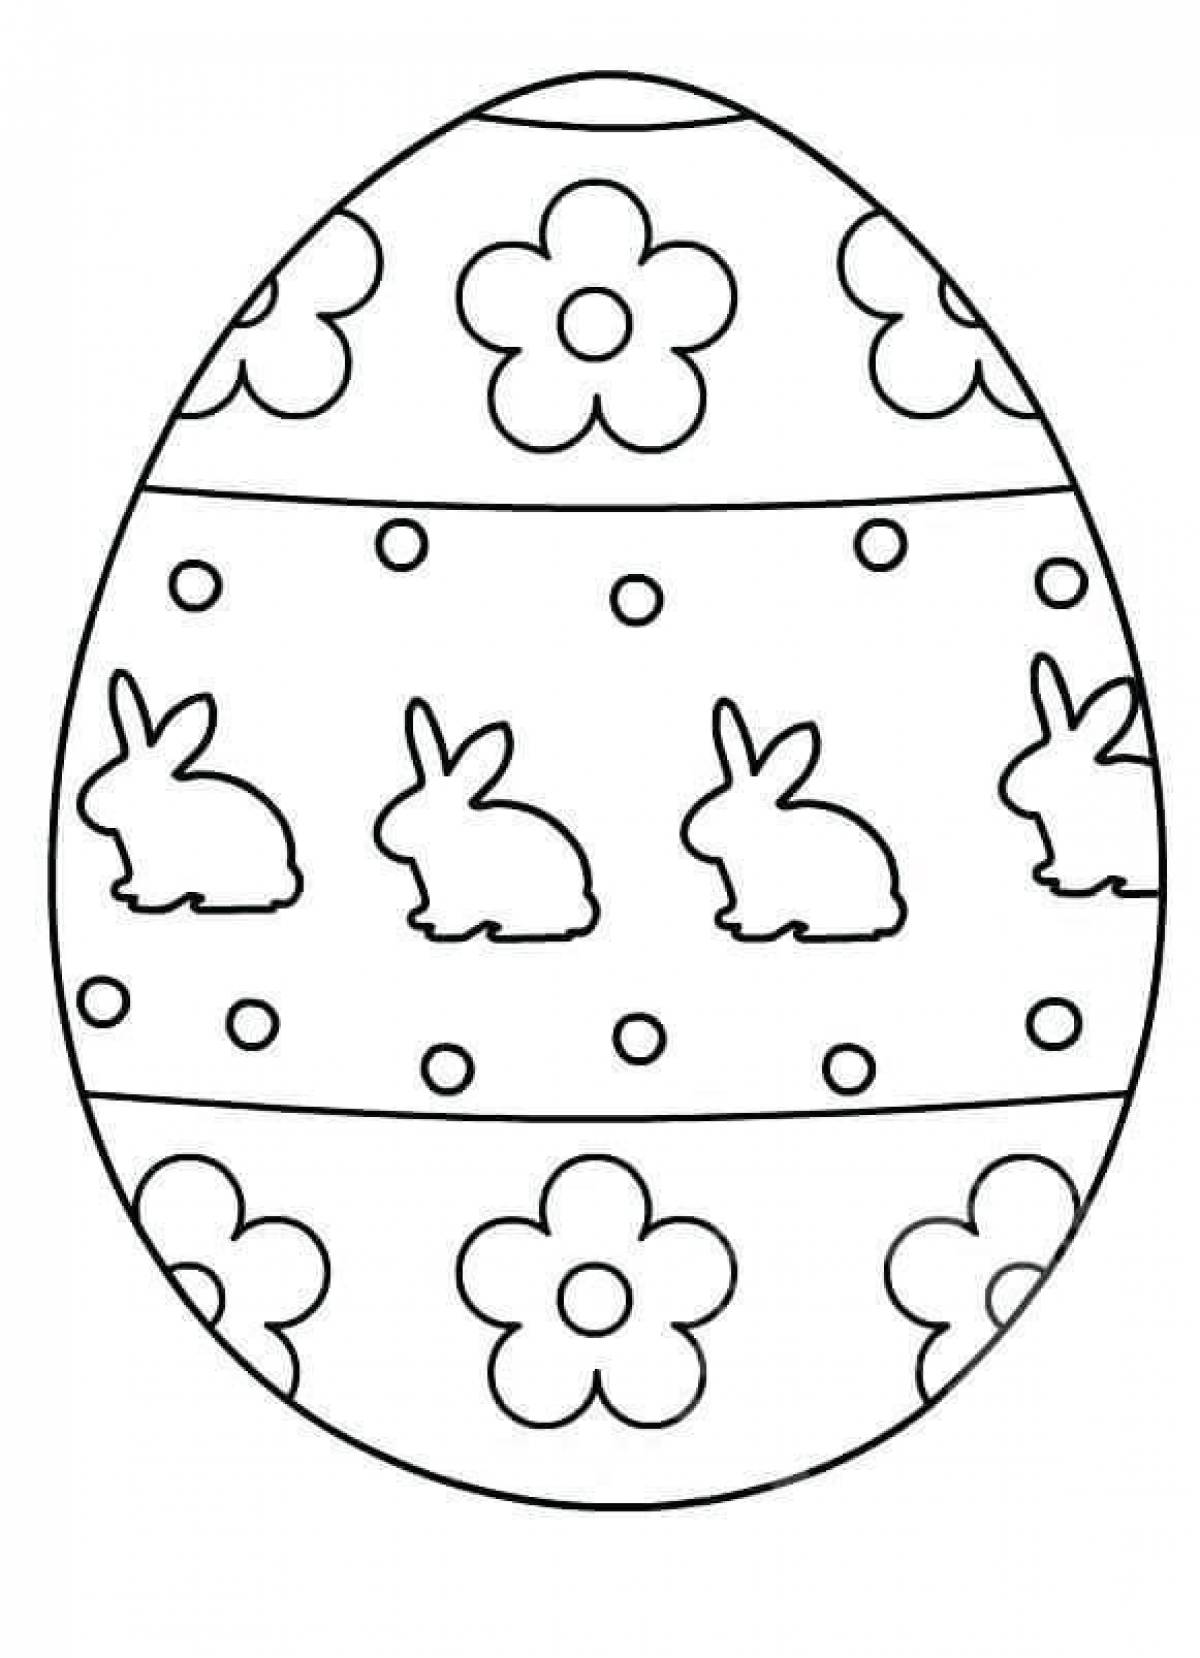 Easter eggs live coloring page